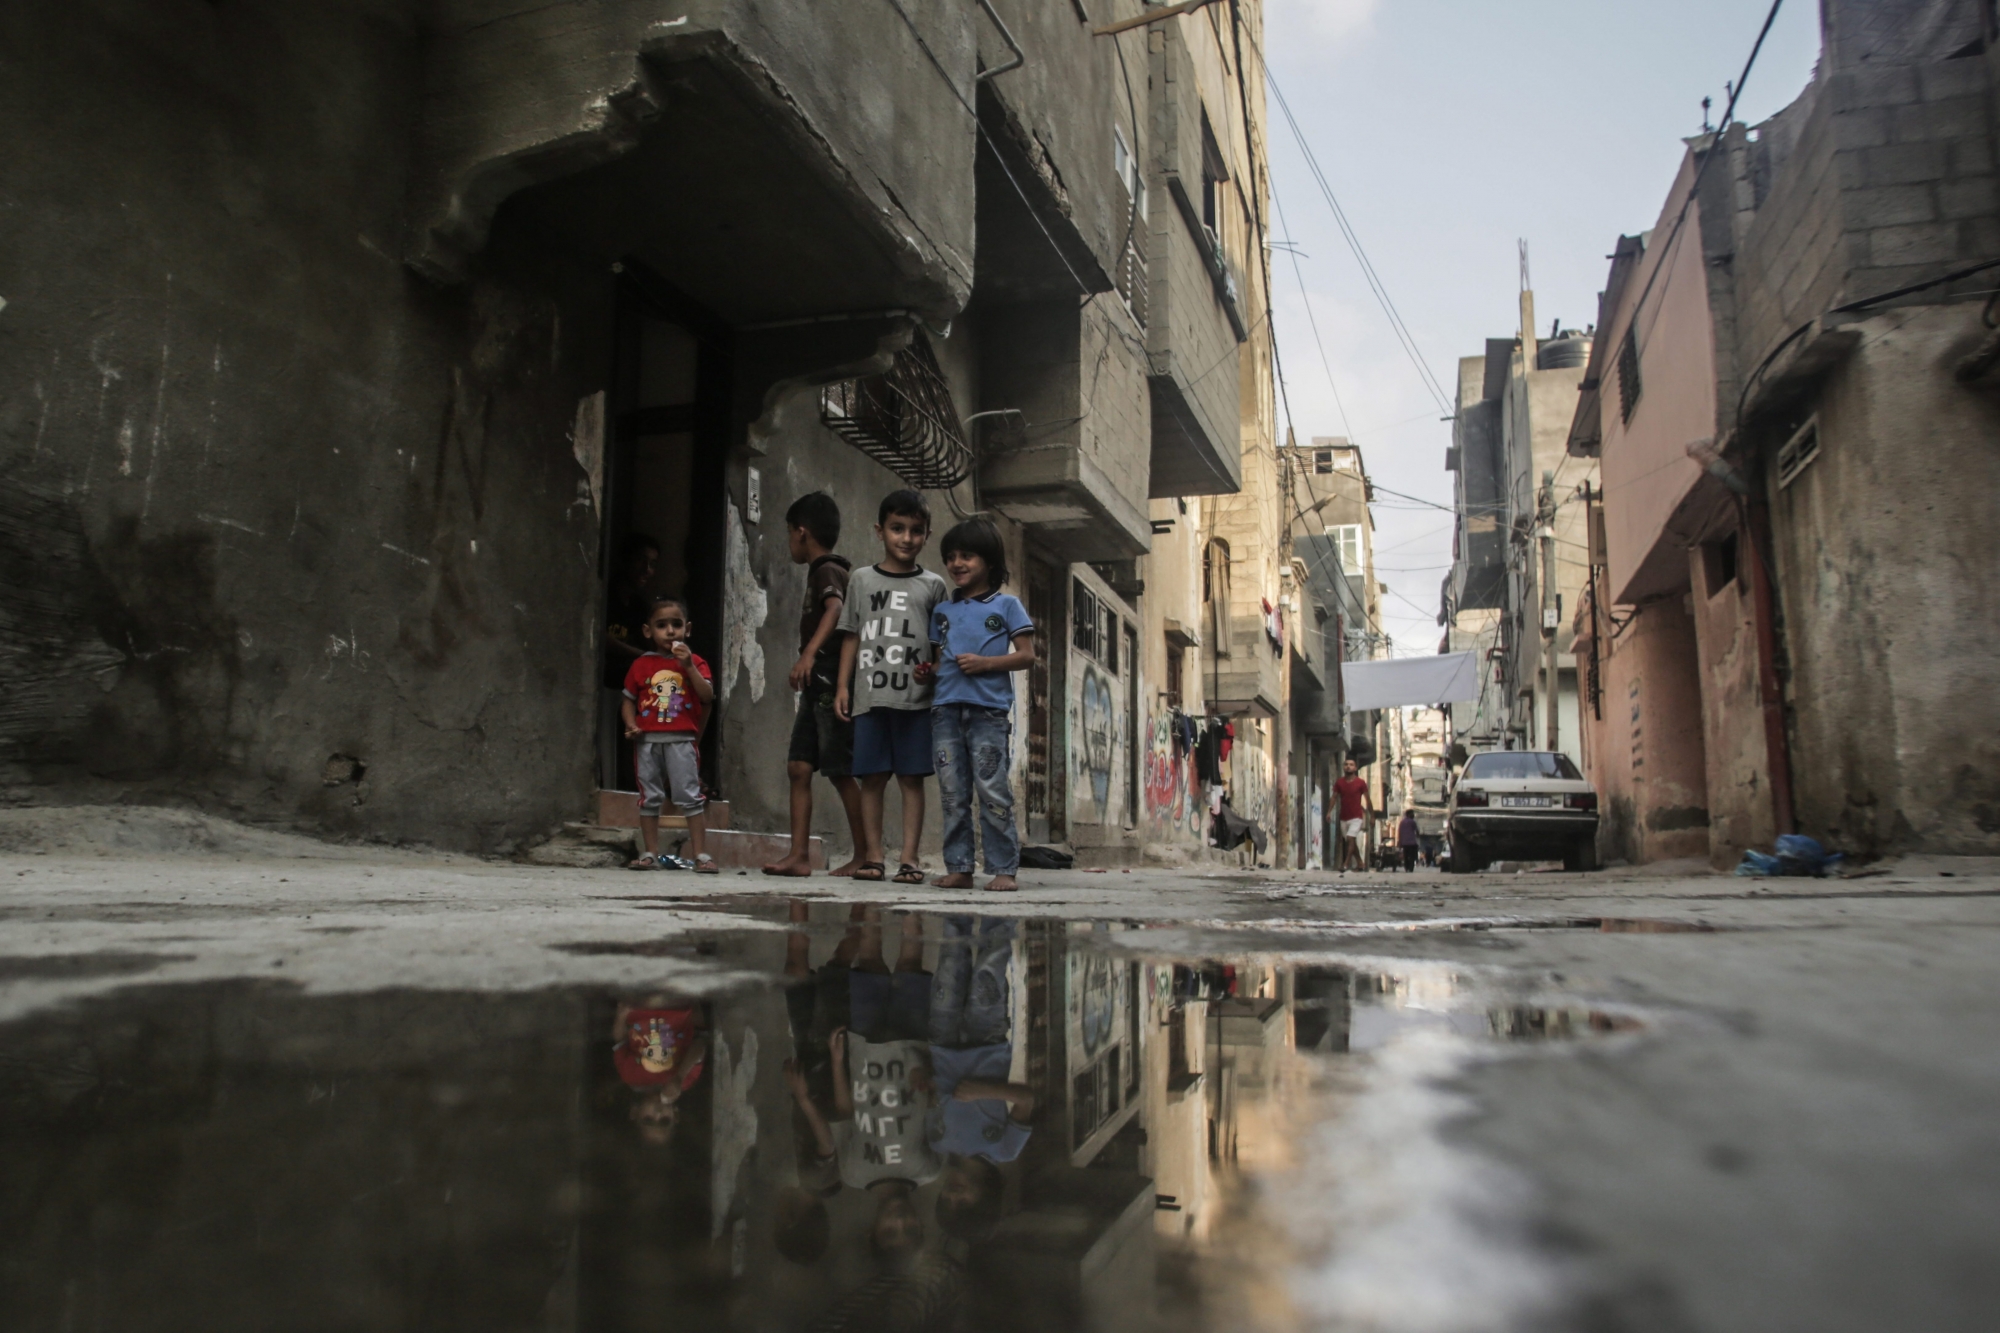 epa06991146 Palestinians refugees spend their time in the Shateaa refugee camp in the north west Gaza City, 01 September 2018. According to media reports on 31 August 2018, the United States has ended all funding to the United Nations Relief and Works Agency for Palestine Refugees in the Near East (UNRWA). 'The administration has carefully reviewed the issue and determined that the United States will not make additional contributions to UNRWA' according to a statement by the US State Department.  EPA/HAITHAM IMAD MIDEAST ISRAEL PALESTINIANS US END ALL FUNDING TO THE UNRWA